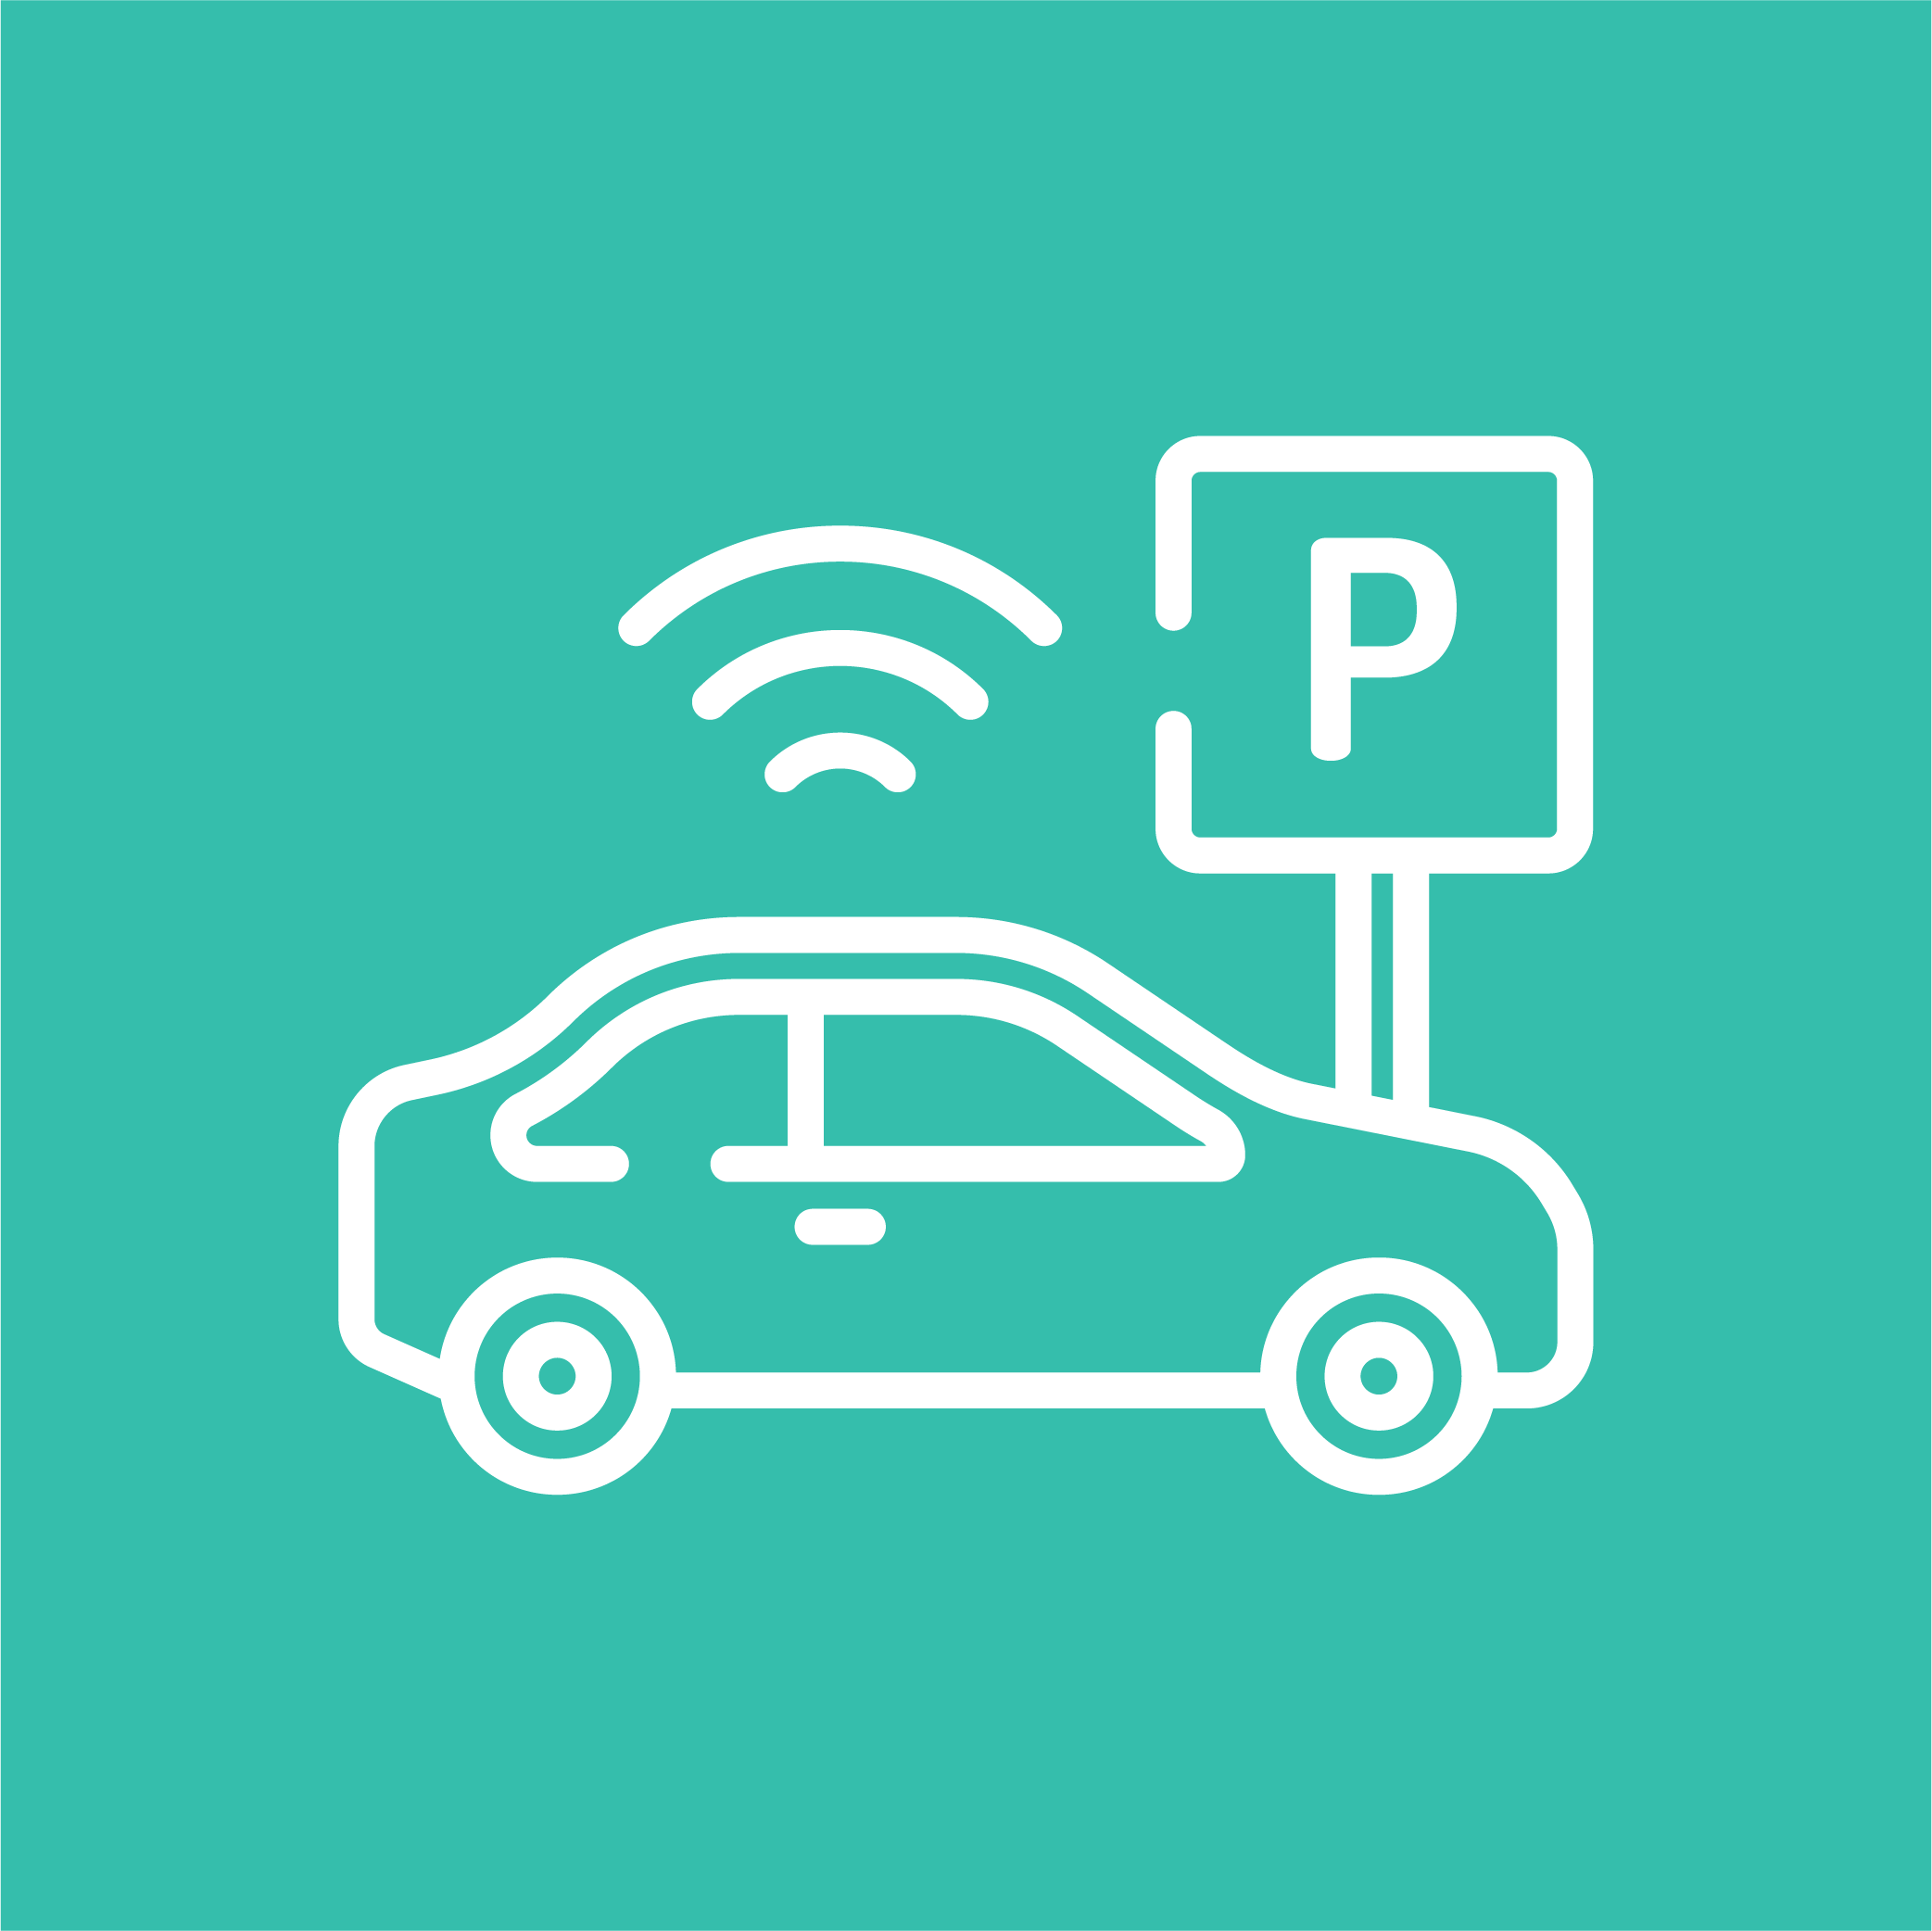 White car parking icon with aqua background